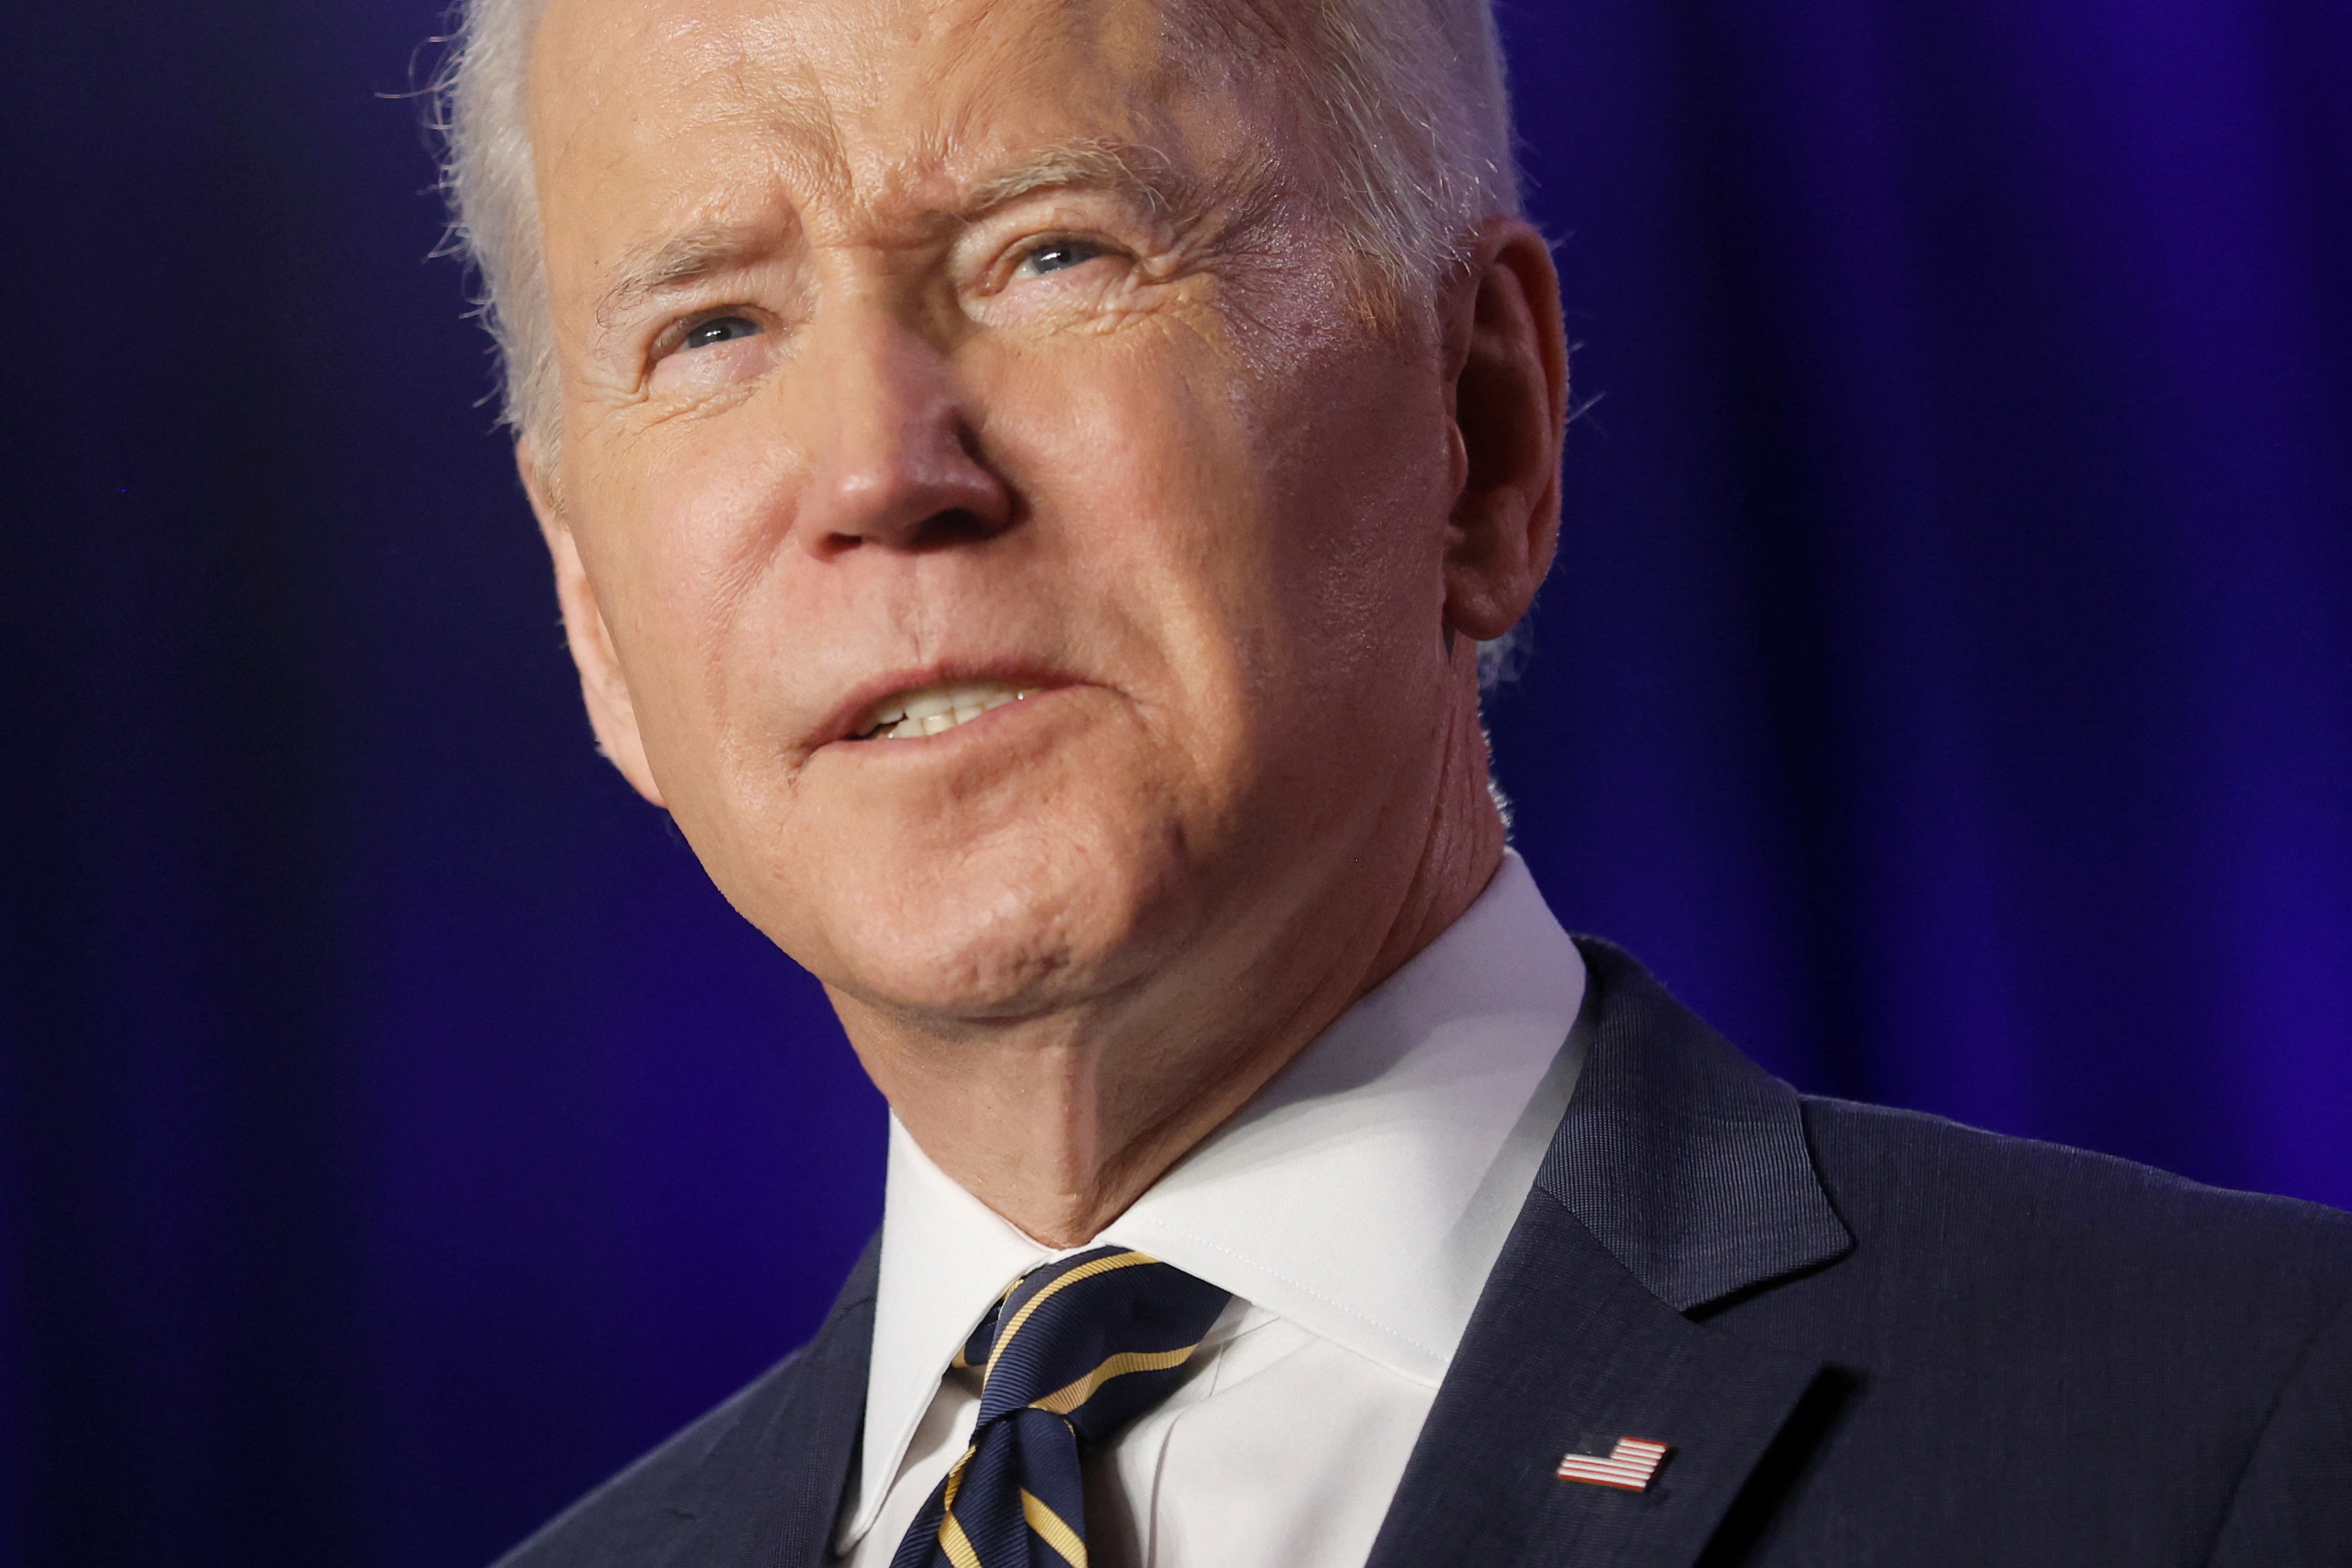 U.S. President Joe Biden delivers remarks at the House Democratic Caucus Issues Conference in Philadelphia